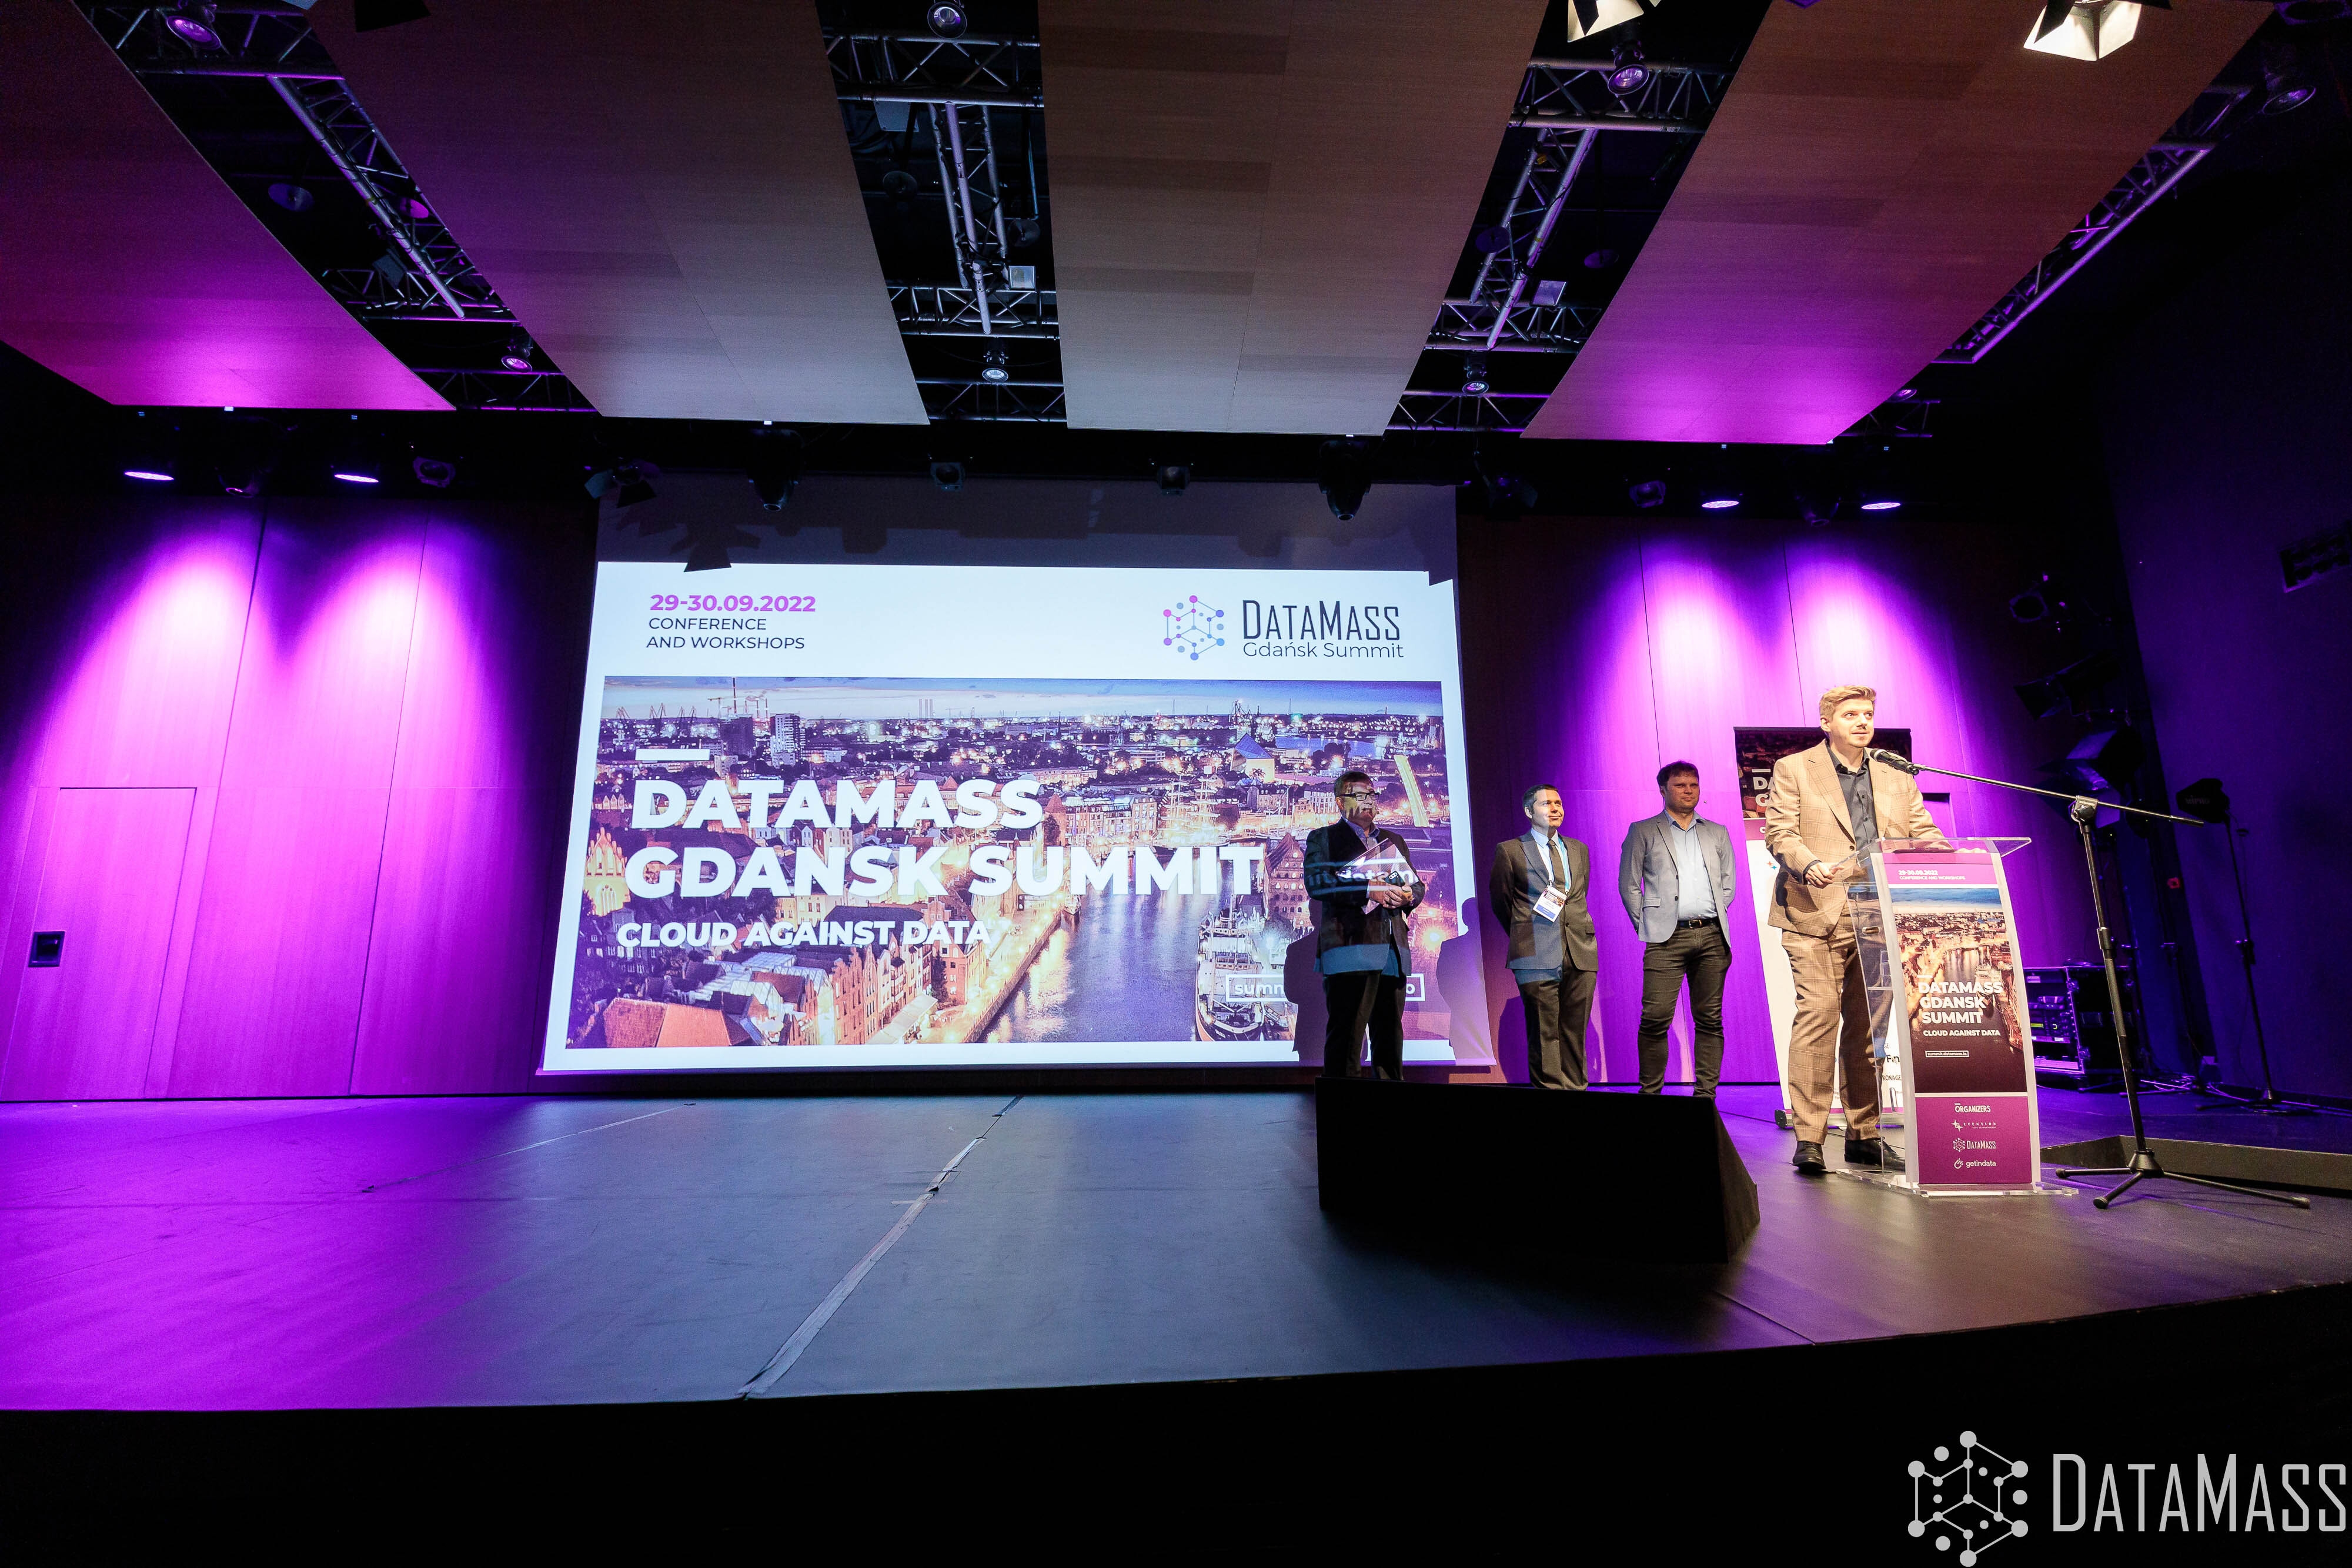 A Review of the Presentations at the DataMass Gdańsk Summit 2022